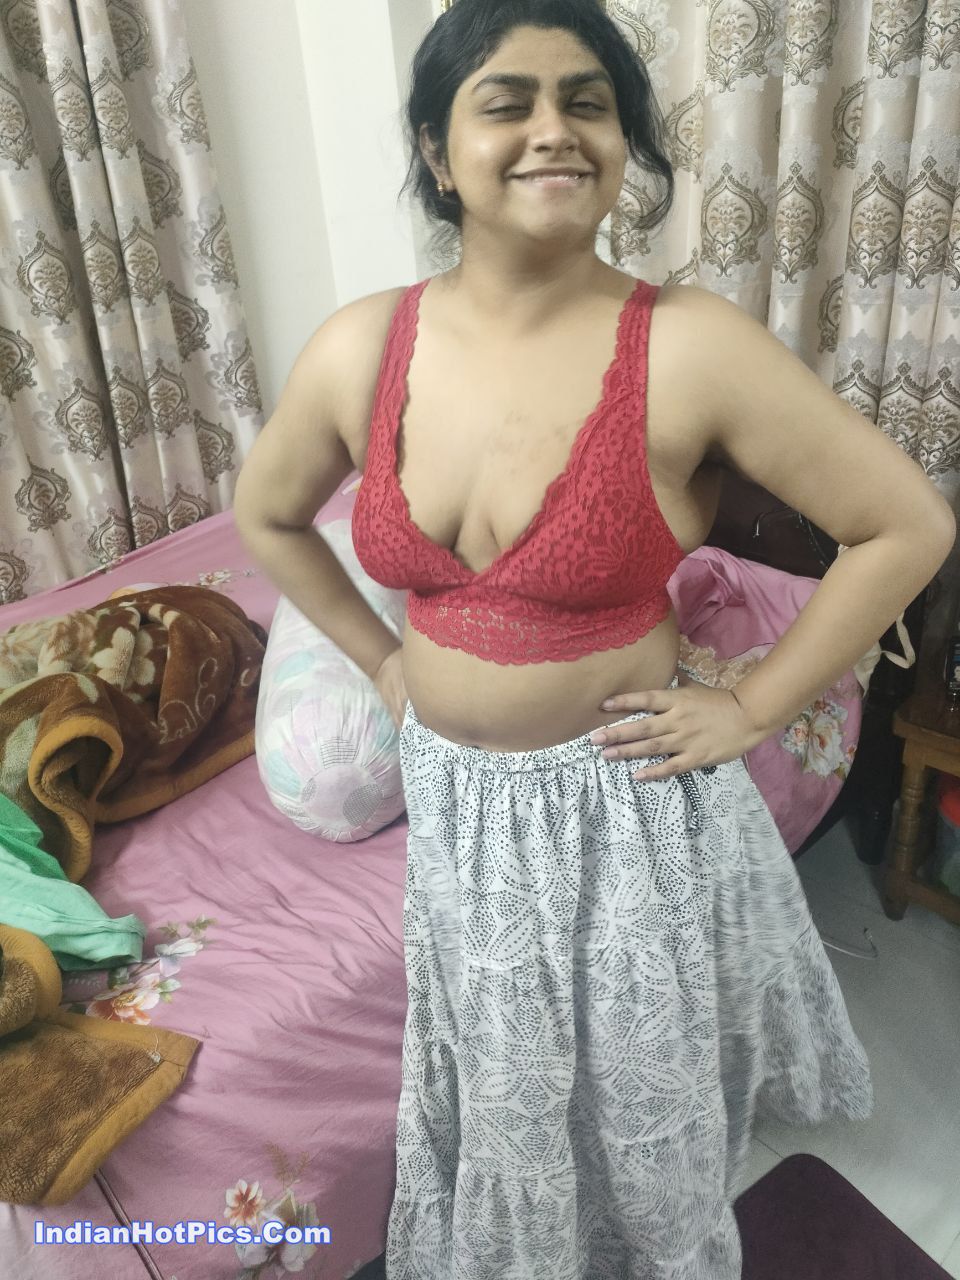 Indian Wife Nude And Sex Honeymoon Photos pic